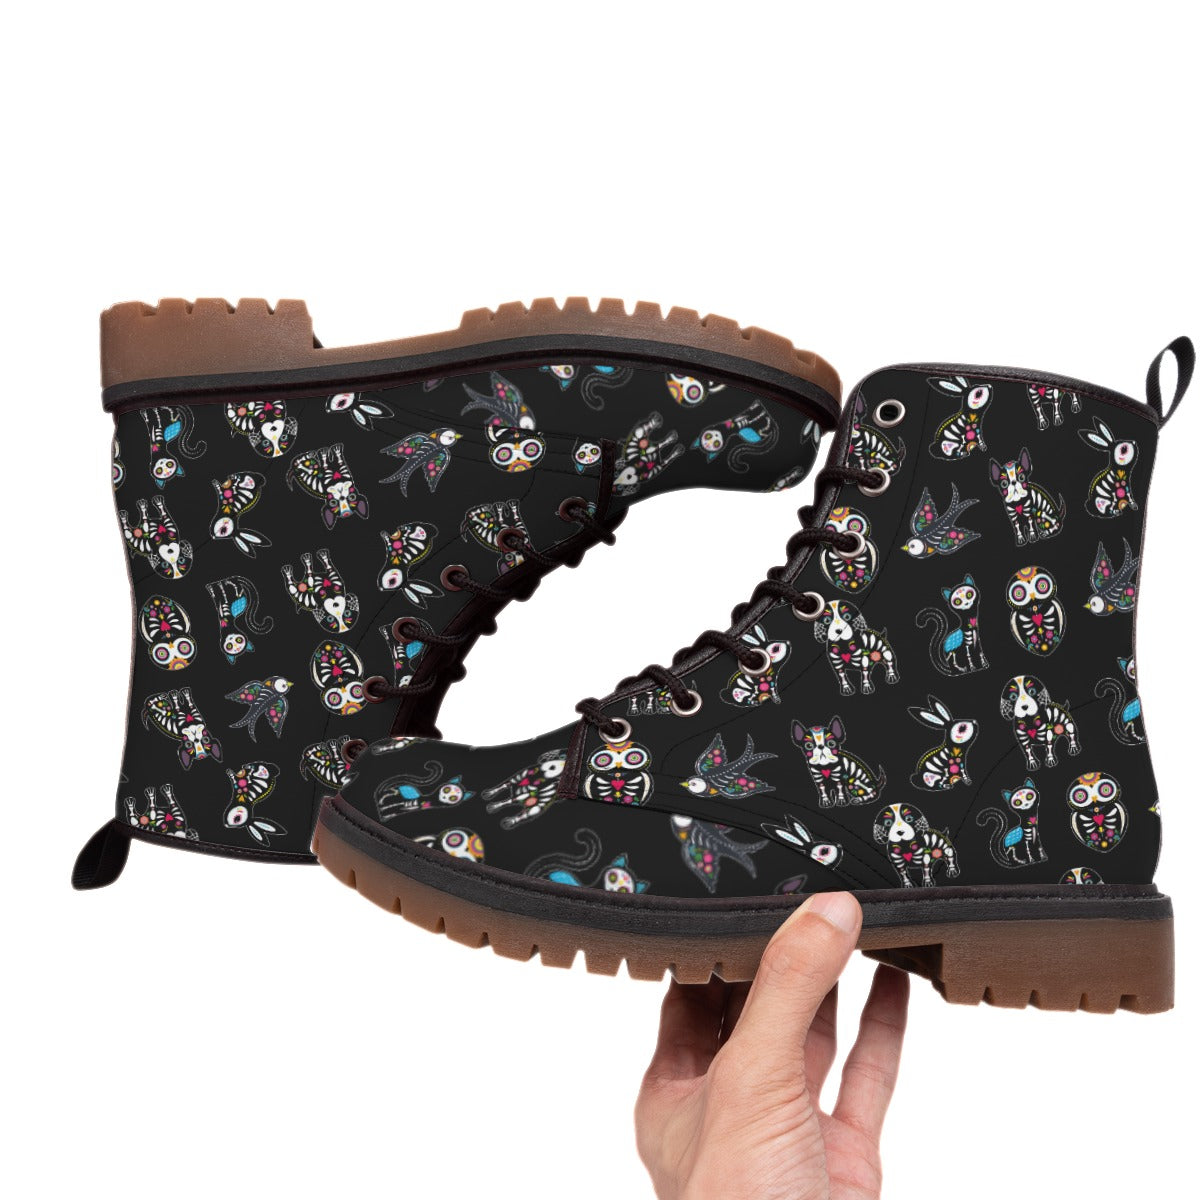 Day of the dead skull animal boots, sugar skull men's women's boots shoes